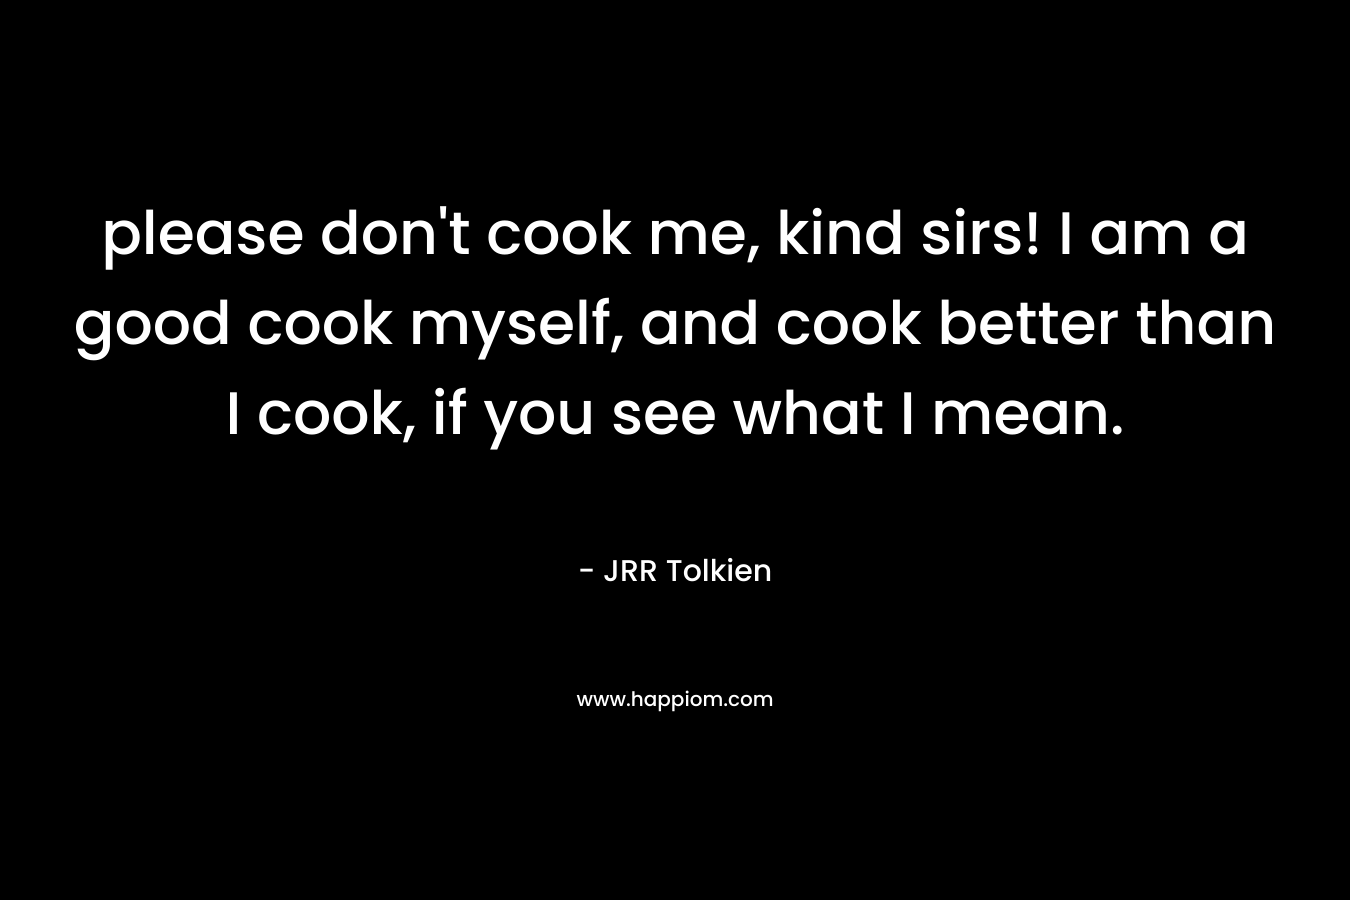 please don't cook me, kind sirs! I am a good cook myself, and cook better than I cook, if you see what I mean.